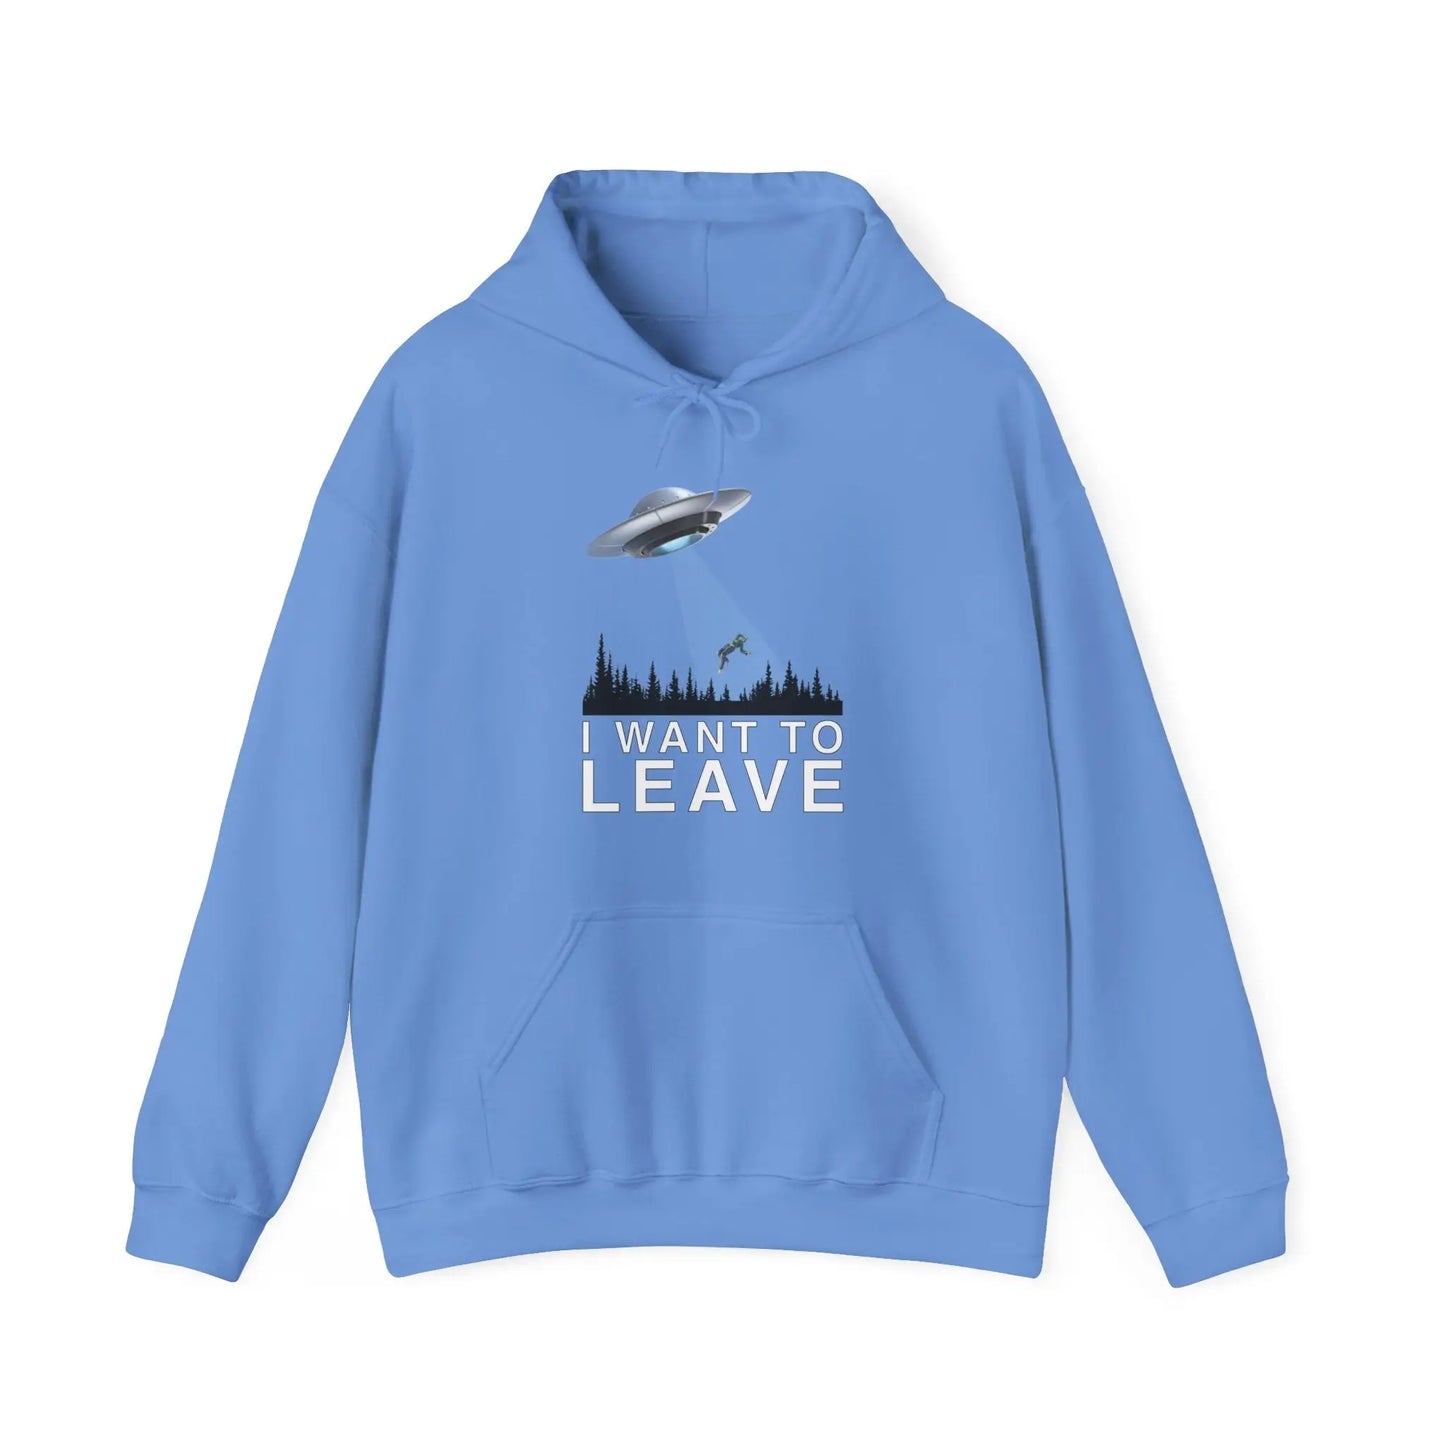 I Want To Leave Men's Hooded Sweatshirt - Wicked Tees